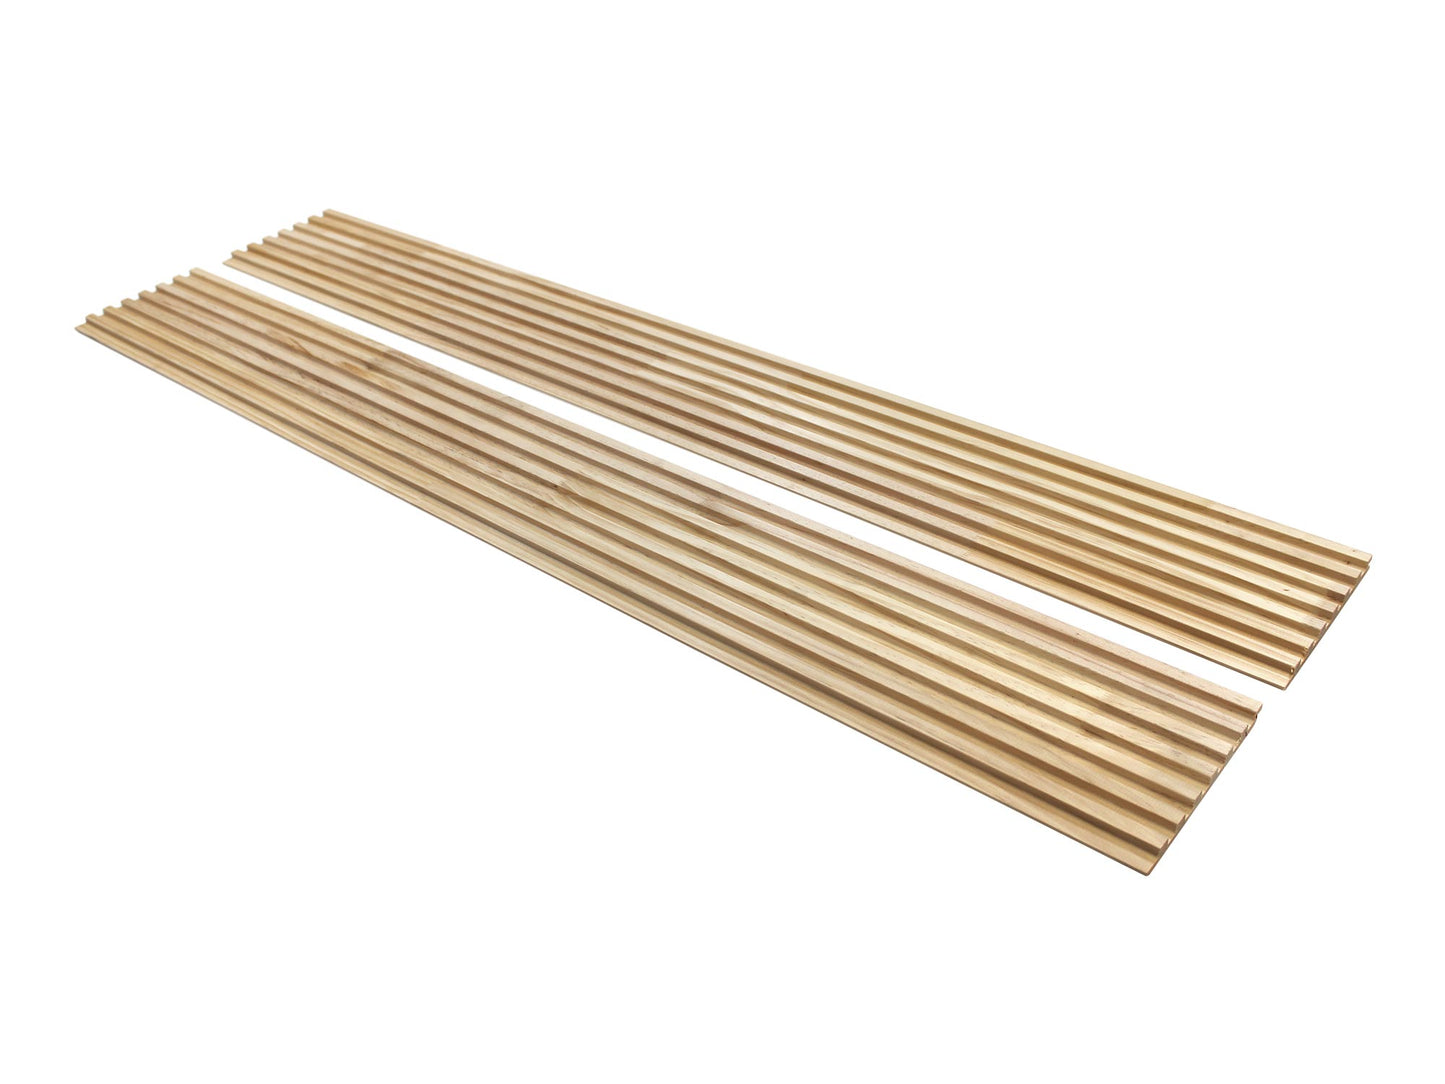 Unfinished Slat Wood Panels for Walls, Paint and Stain Grade - Sleek (106" x 5 3/4")